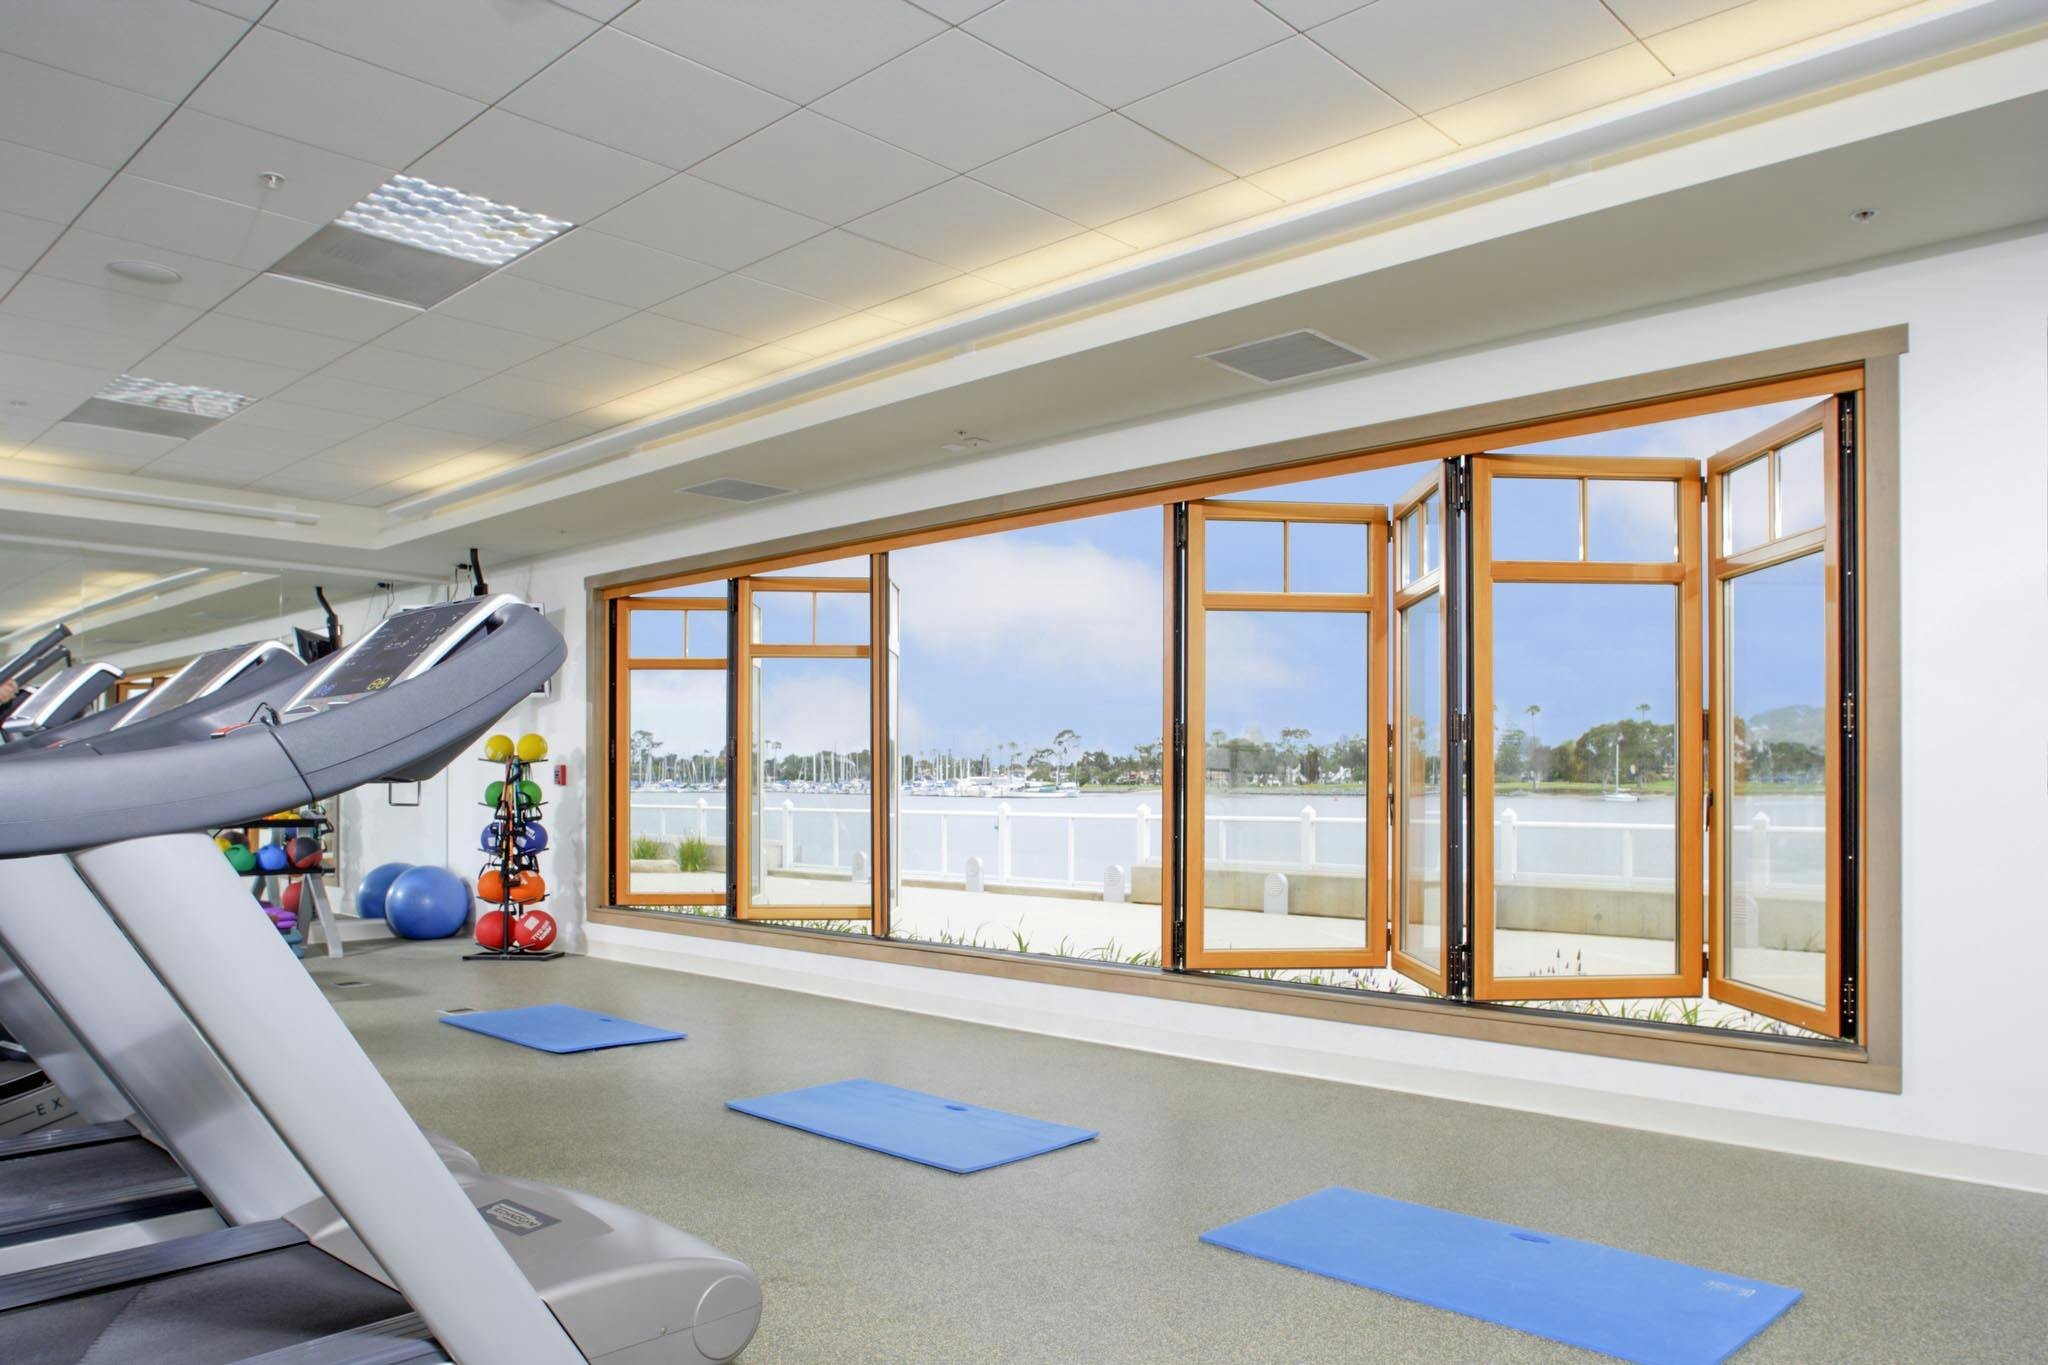 fitness center design with folding glass wall for fresh air